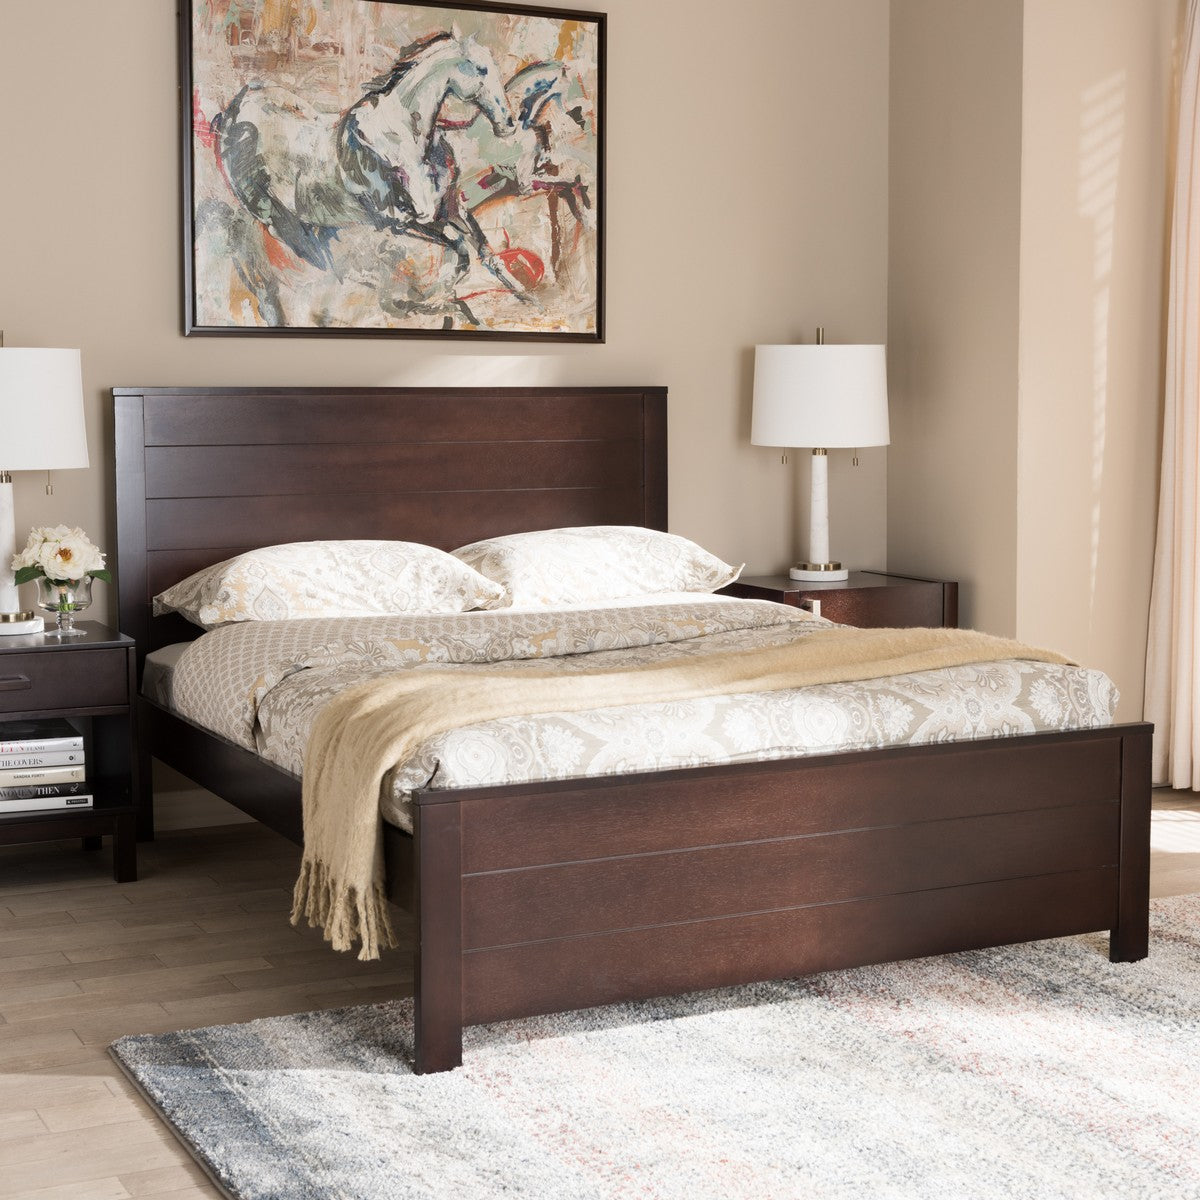 Baxton Studio Catalina Modern Classic Mission Style Dark Brown-Finished Wood Full Platform Bed